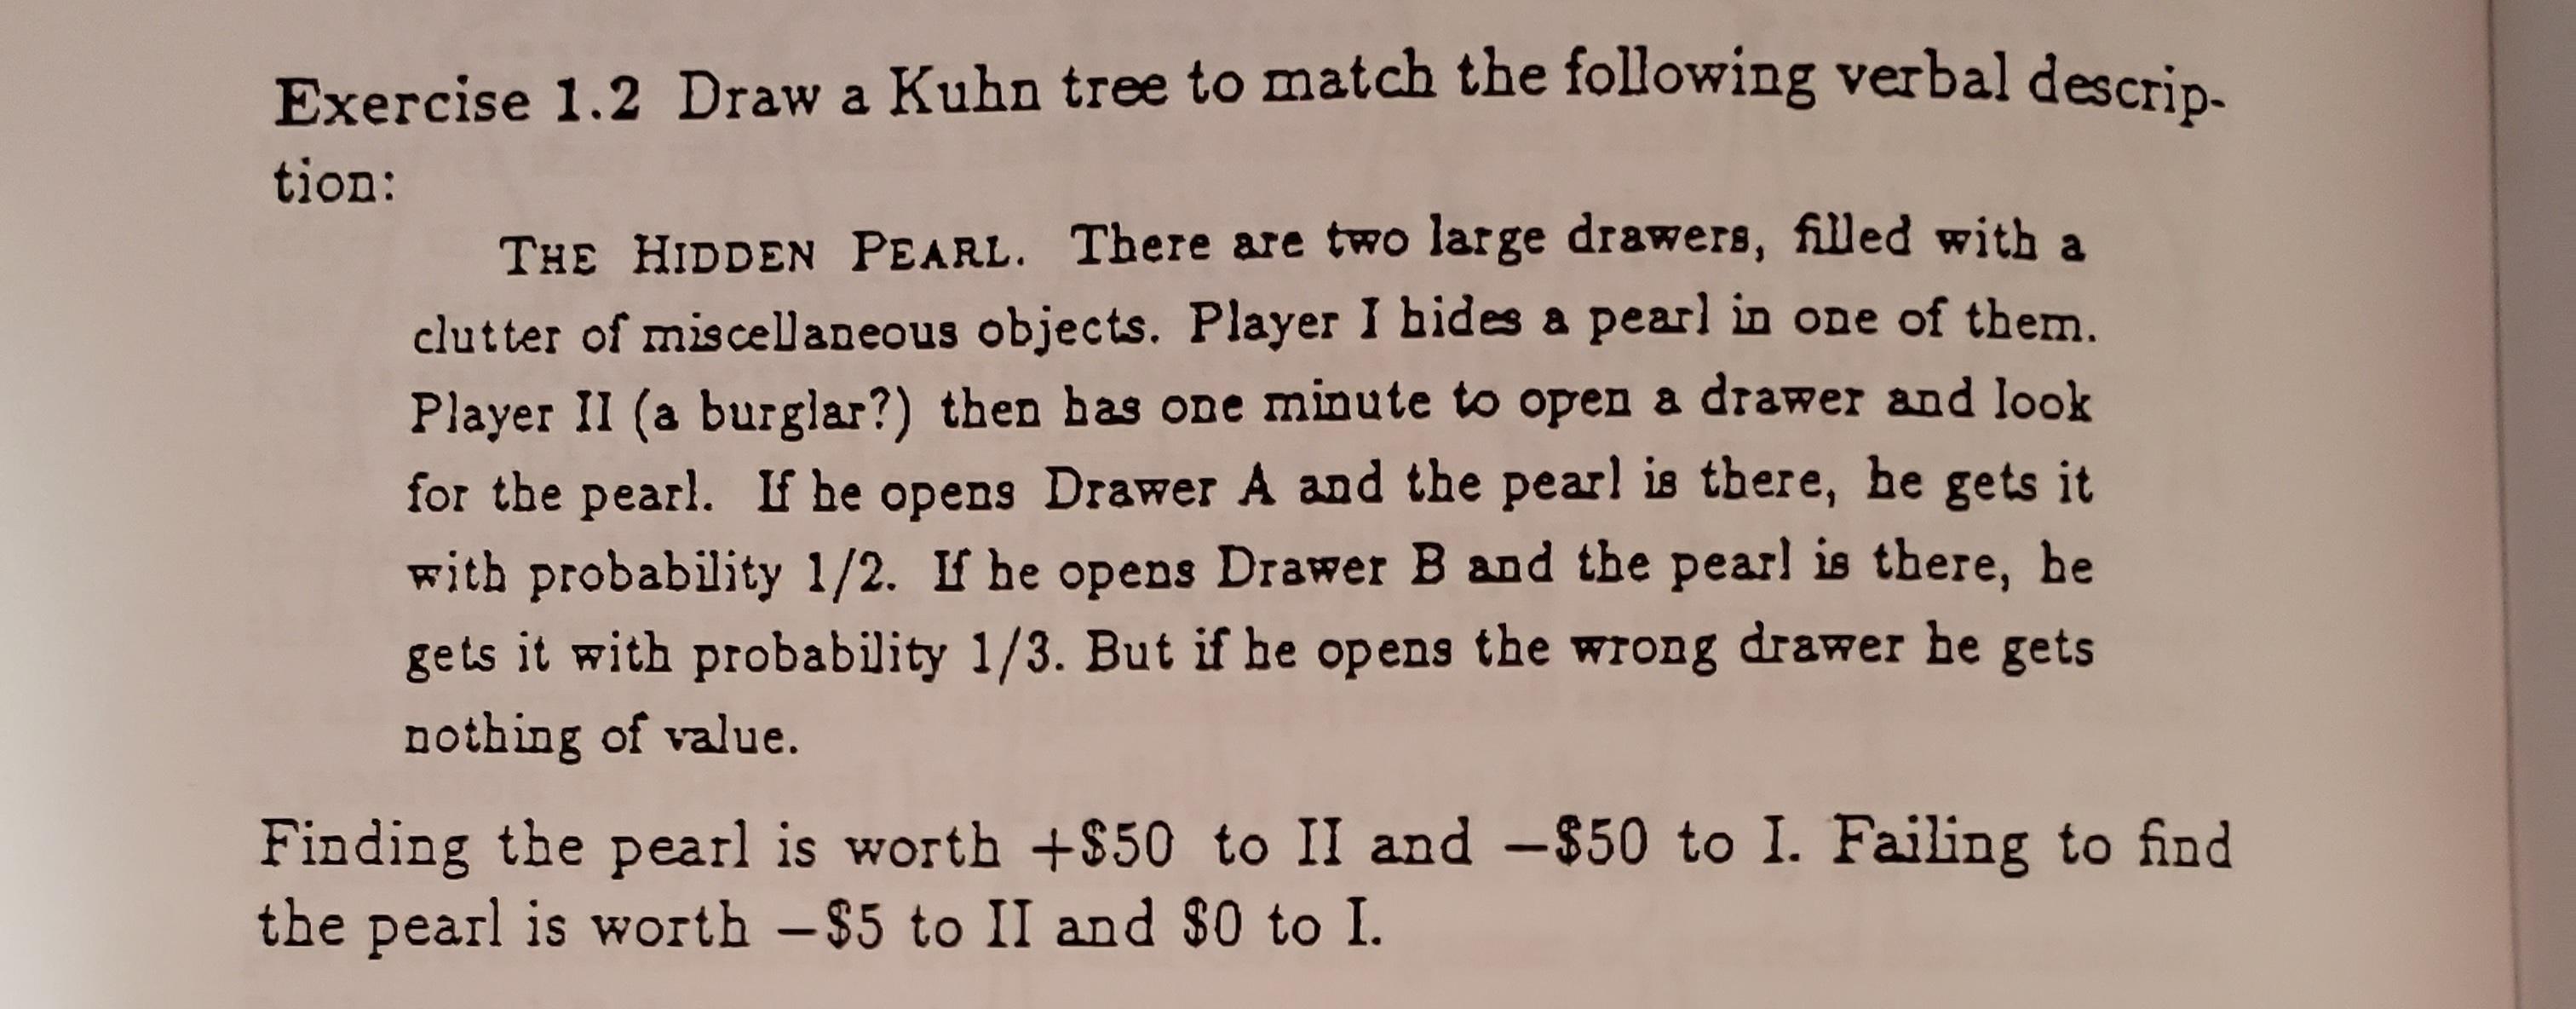 tion: Exercise 1.2 Draw a Kuhn tree to match the following verbal descrip- THE HIDDEN PEARL. There are two